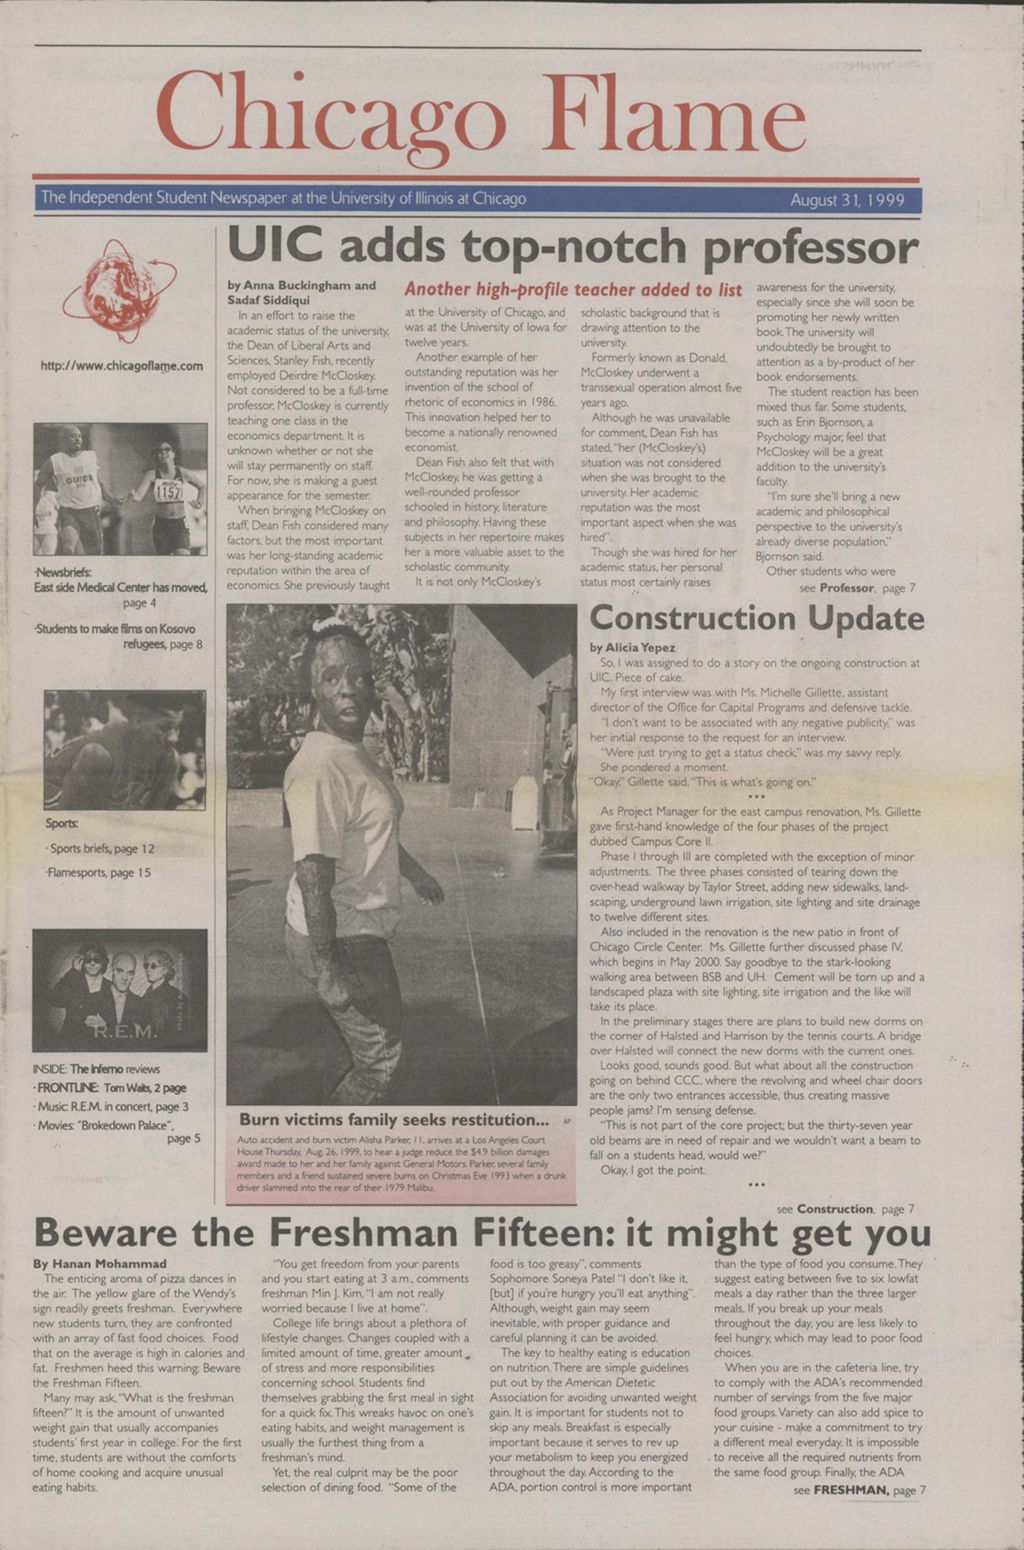 Miniature of Chicago Flame (August 31, 1999)